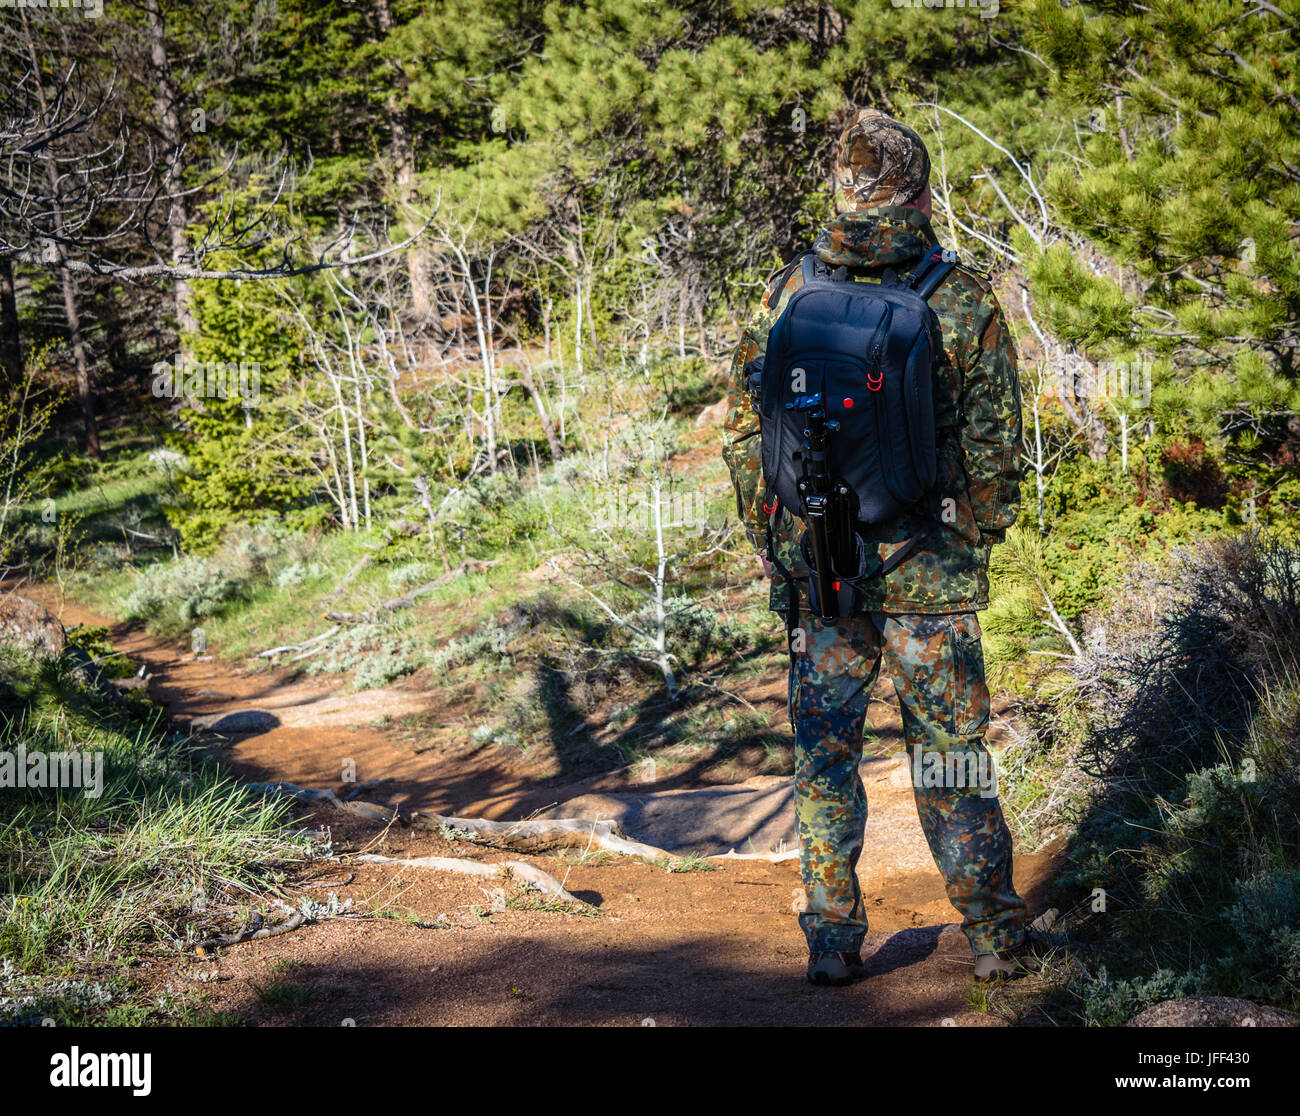 Hiker man photographer in camouflage outfit with a backpack and tripod standing on a mountain forest trail and watching wildlife, rear view Stock Photo